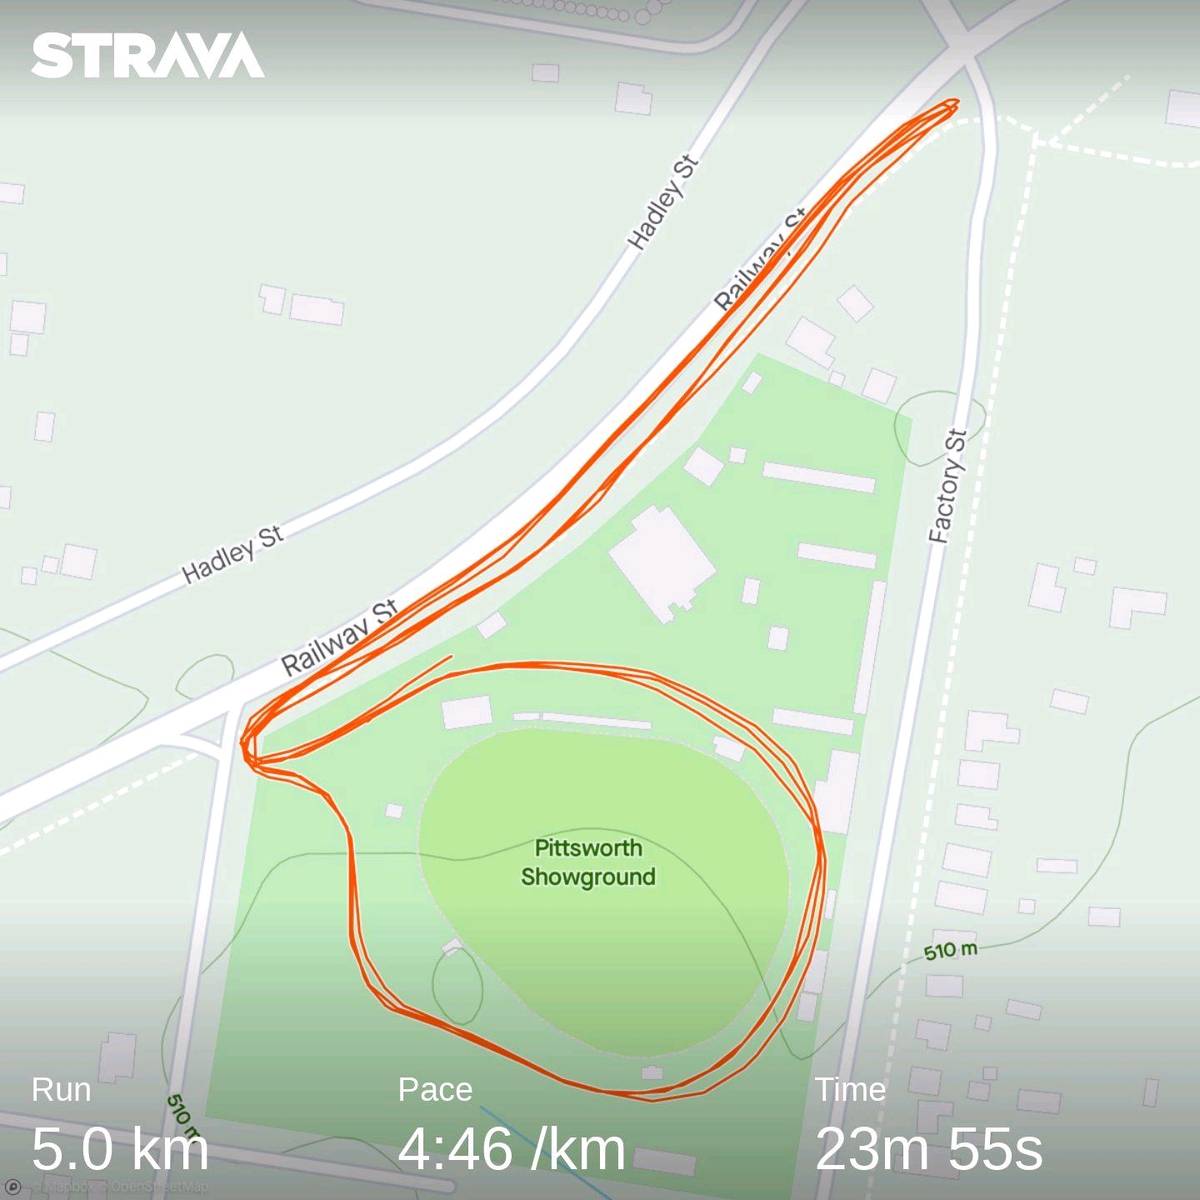 All parkruns are 5km, however the actual course varies from parkrun to parkrun. This one is a three lap course, with a lap around the oval and then an out-and-back section alongside the road before coming back to the start/finish line. It was fun actually, seeing how fast I did each lap and seeing if I could hold the pace for each subsequent lap. But I can see how some of the locals would get bored doing the same three laps, every, single, Saturday! (Screenshot from Strava app).